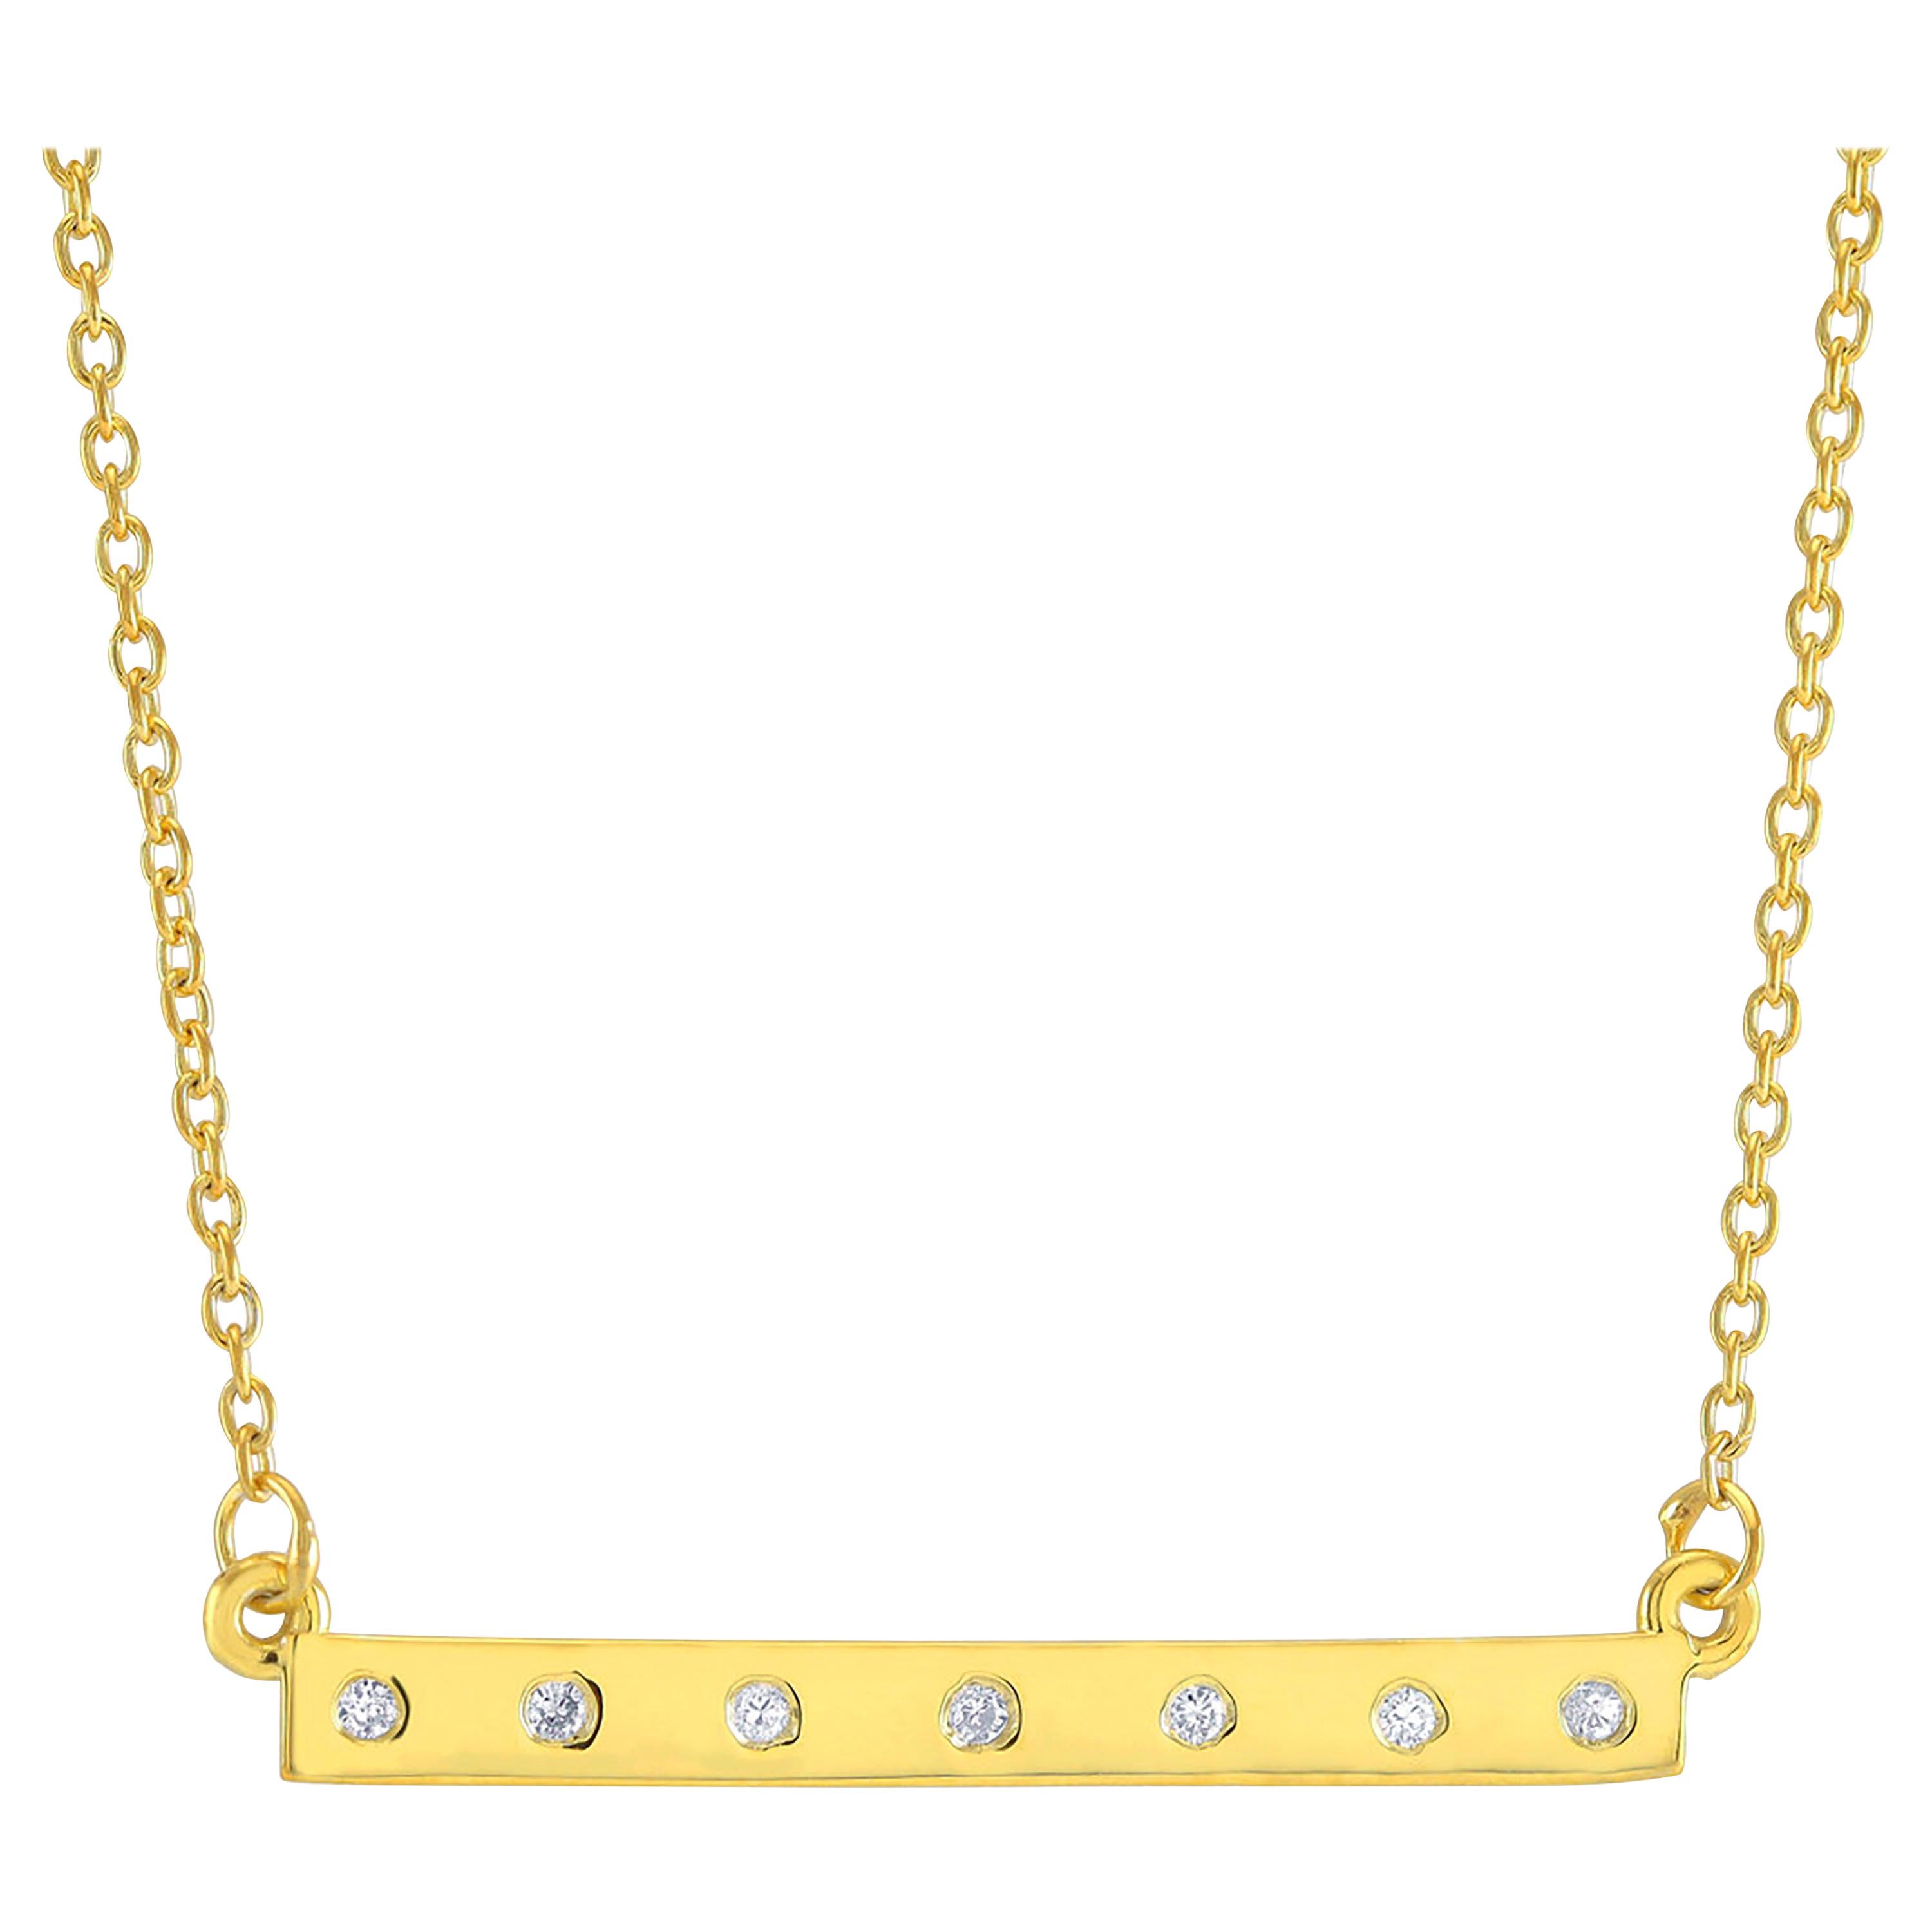 Natural Genuine Diamond Bar Silver Pendant Necklace Yellow Gold-Plated